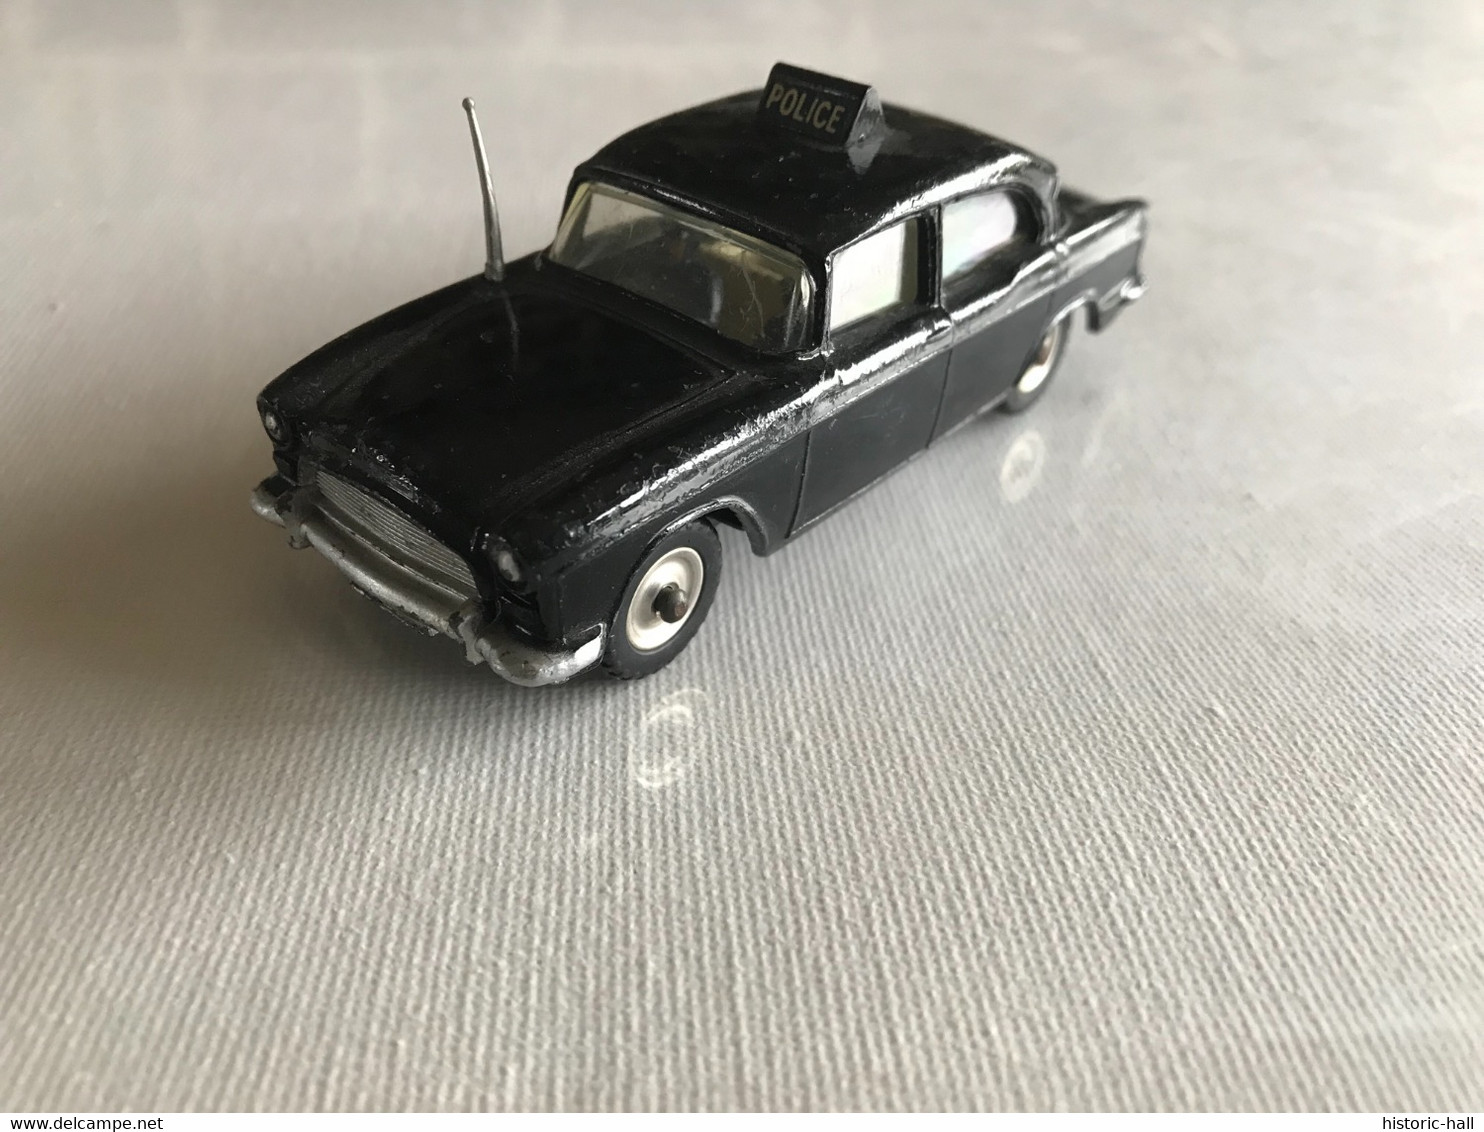 DINKY TOYS - Humber Hawk Police - Dinky